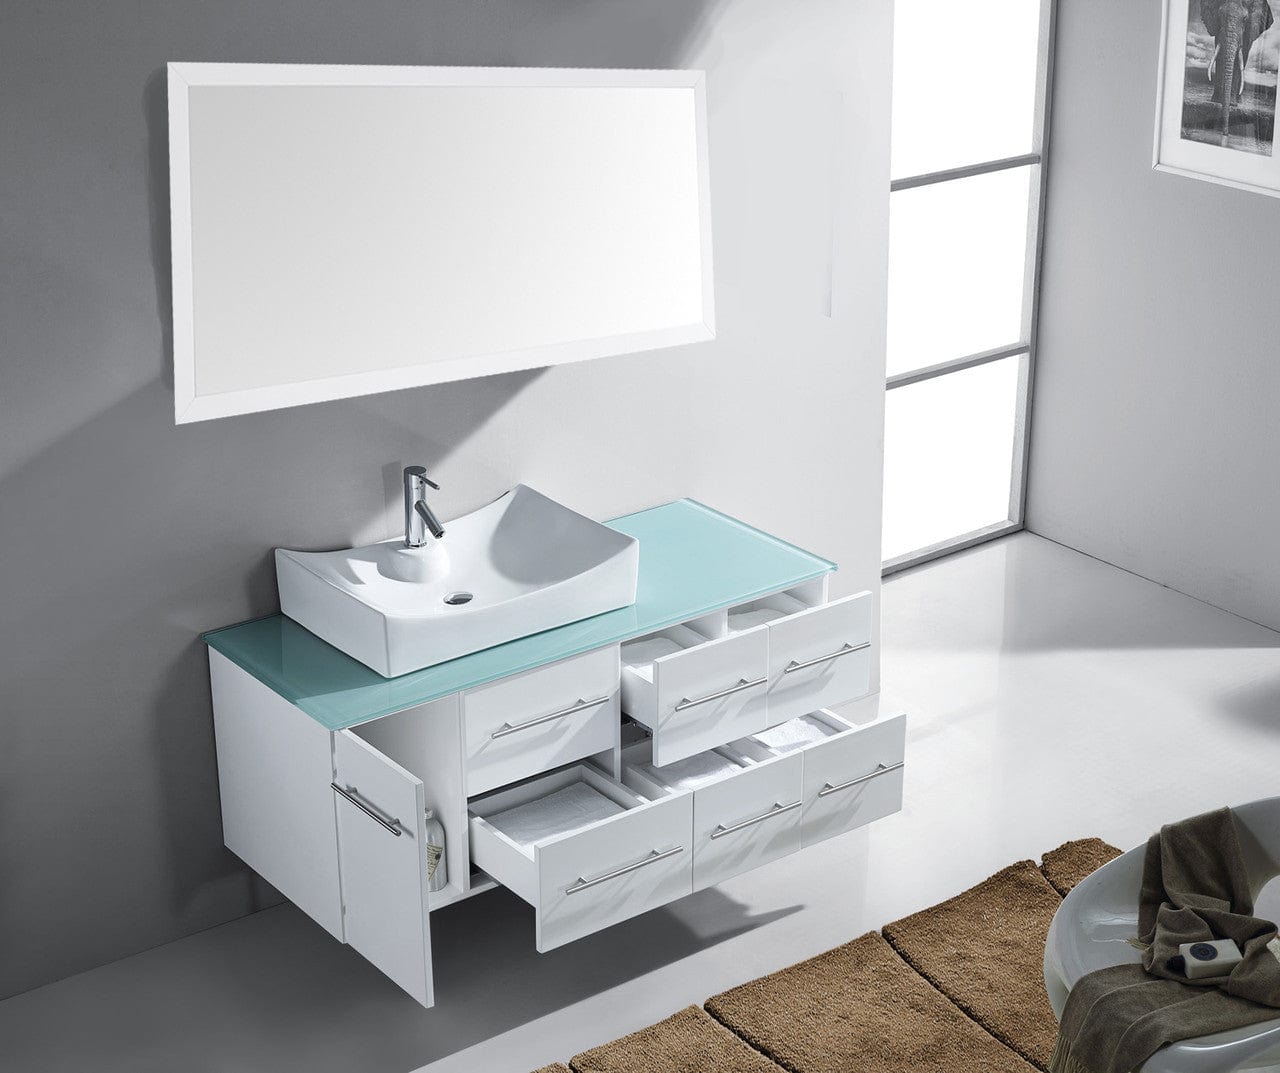  Virtu USA Ceanna 55 Single Bathroom Vanity Set in White w/ Tempered Glass Counter-Top | Square Basin drawers open